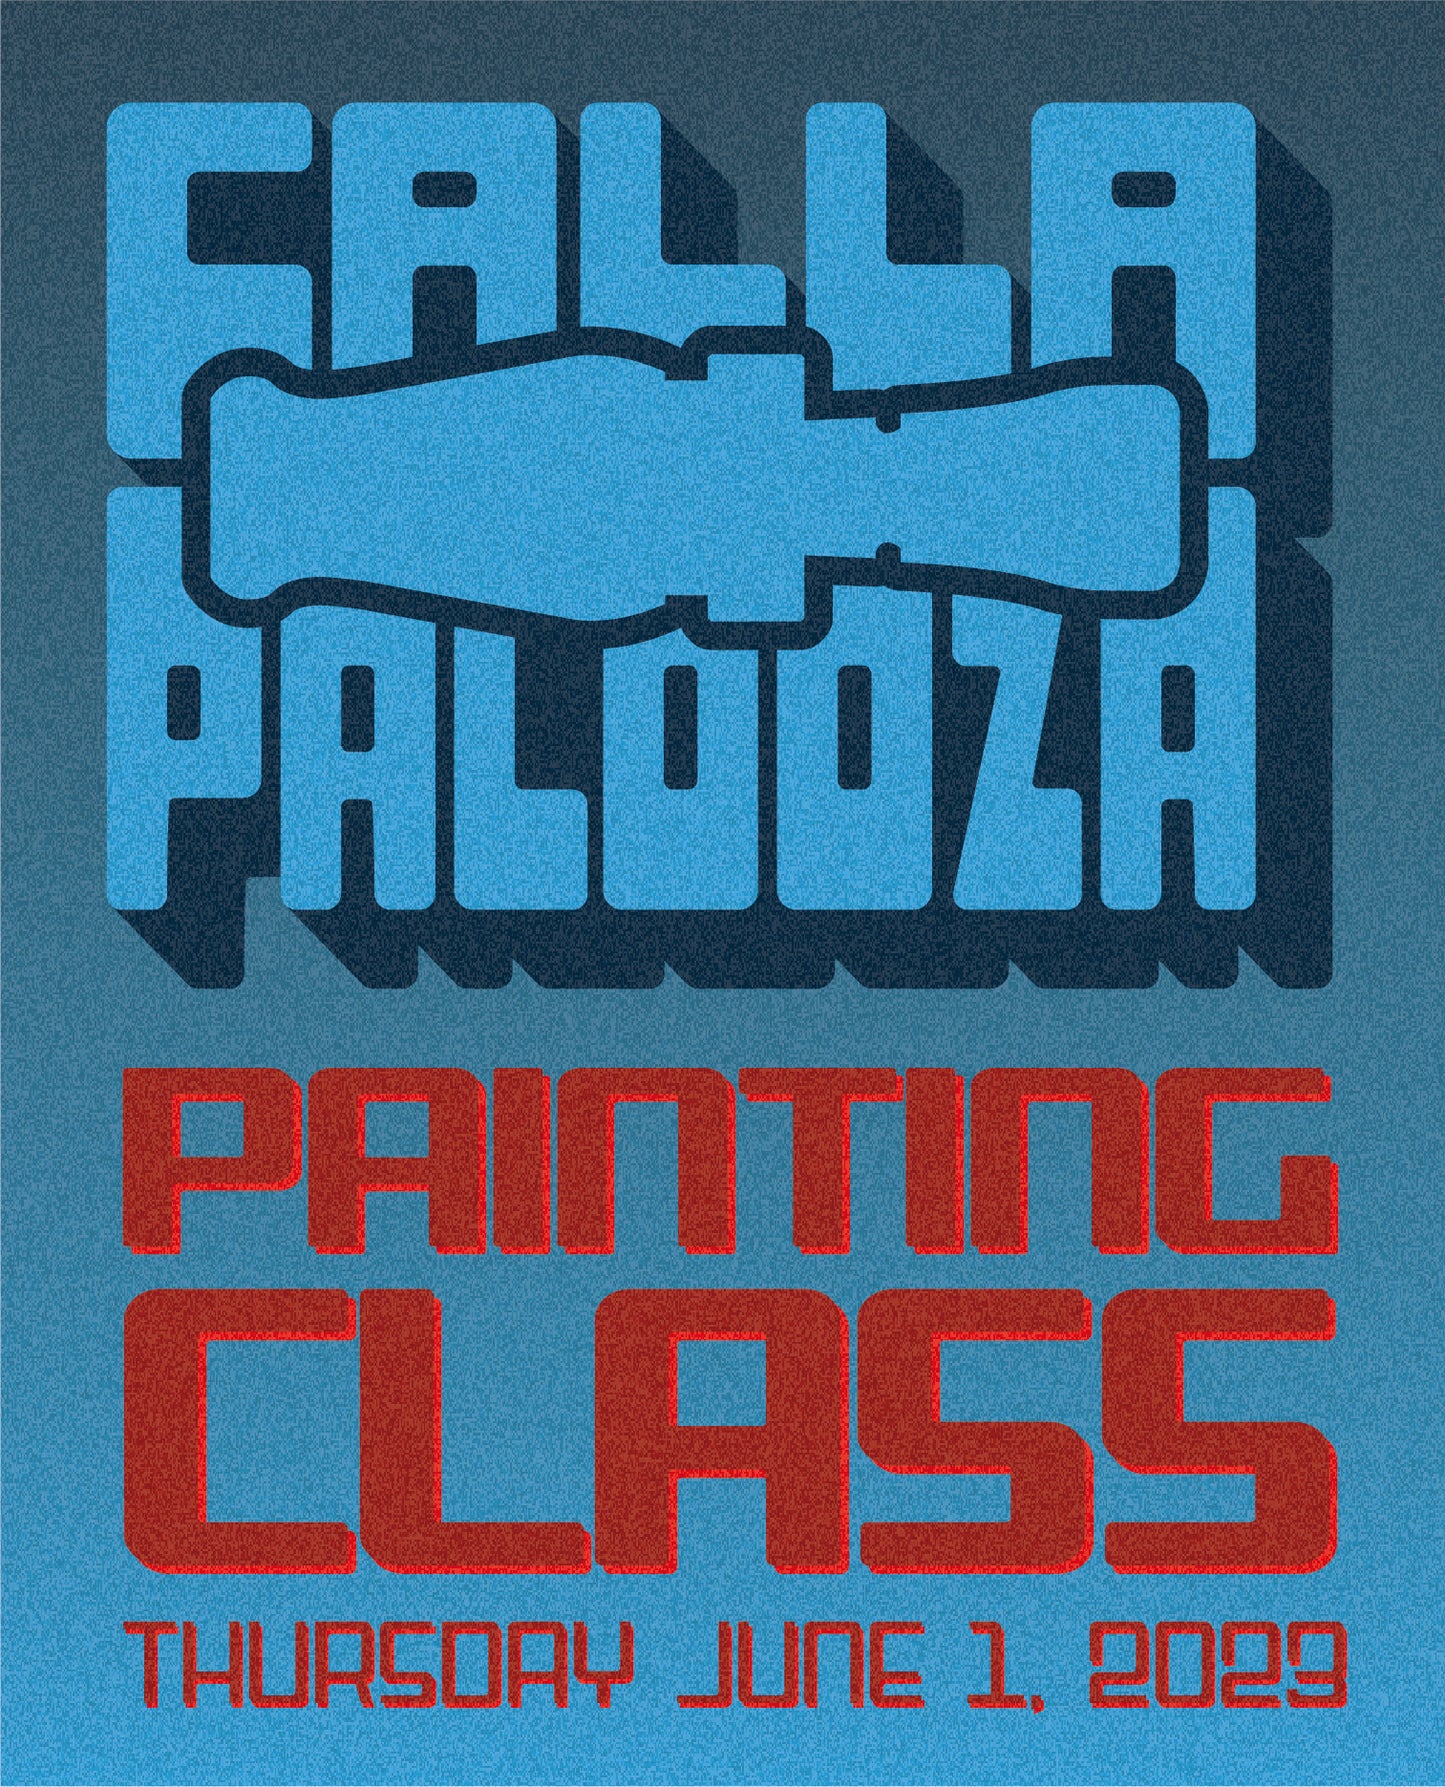 Callapalooza Painting Class - Event Ticket